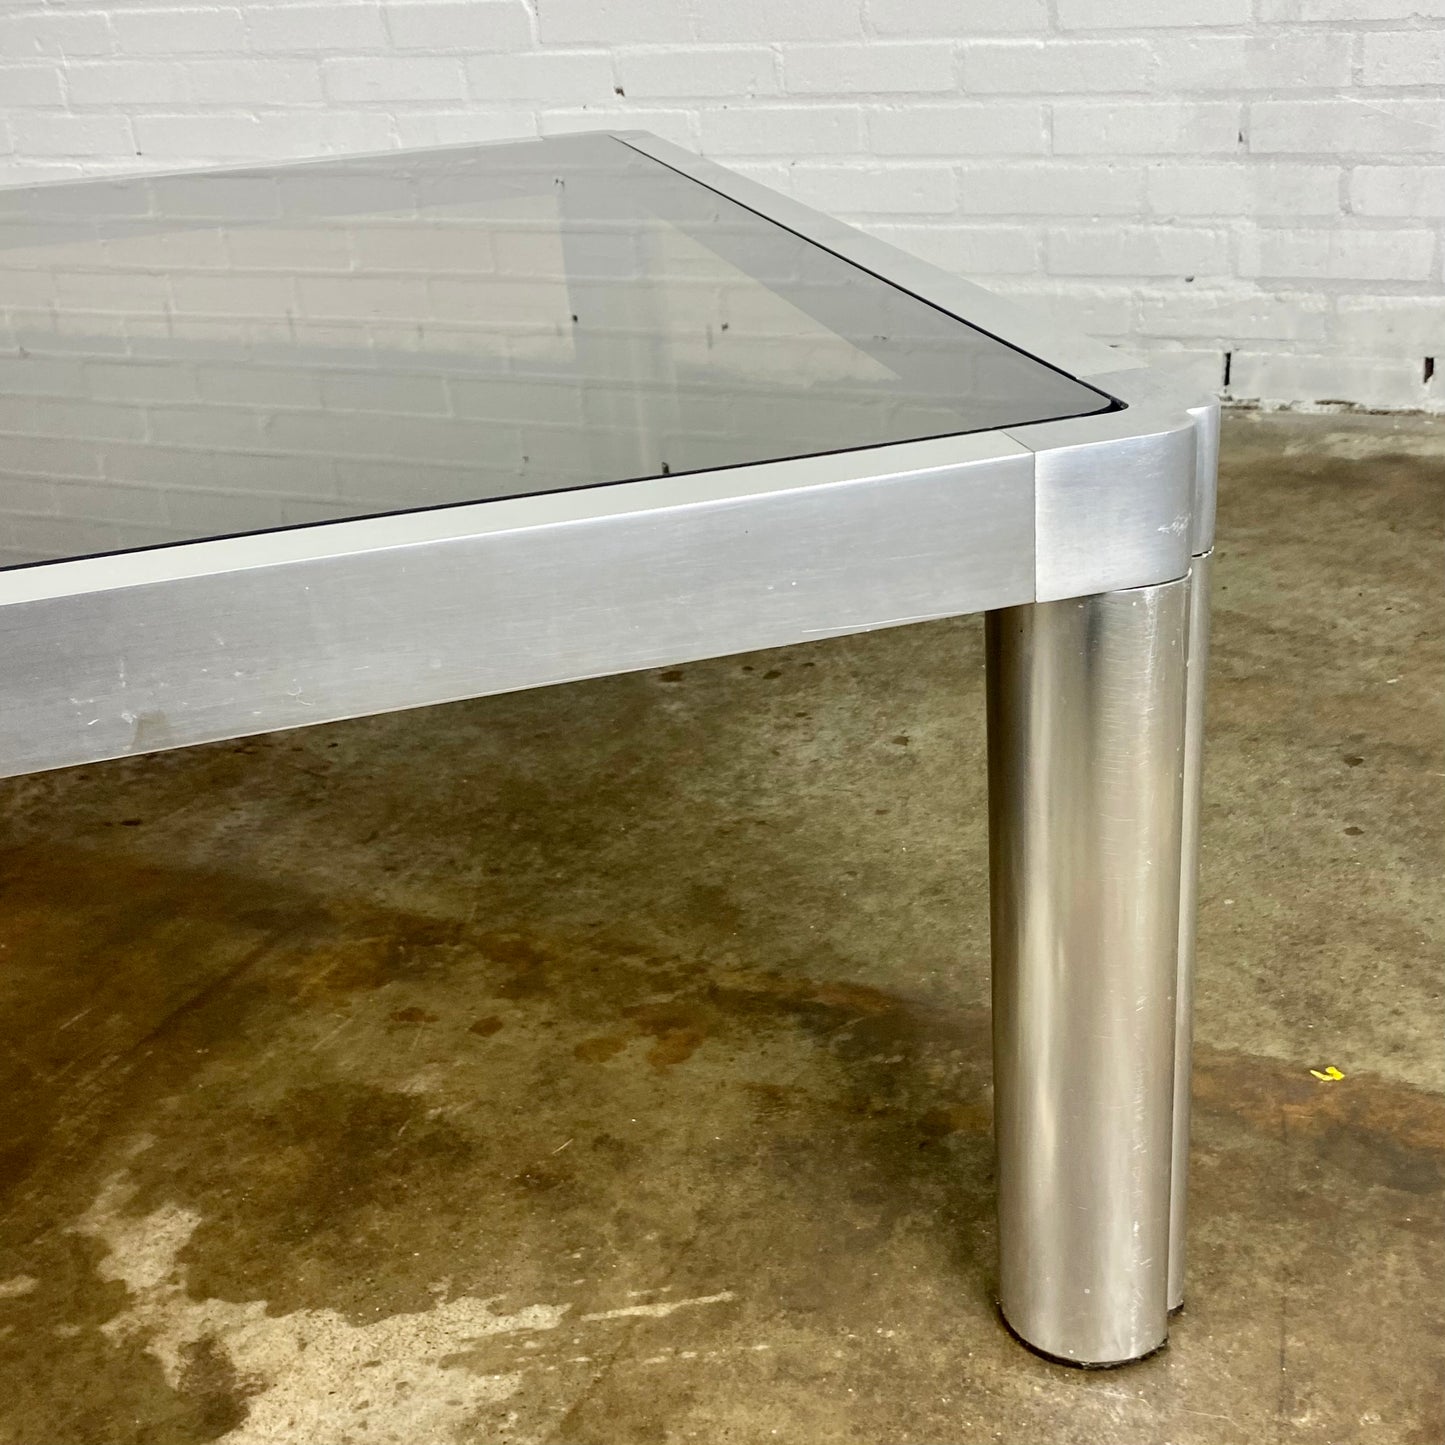 Large coffee table by Kho Liang Ie for Artifort